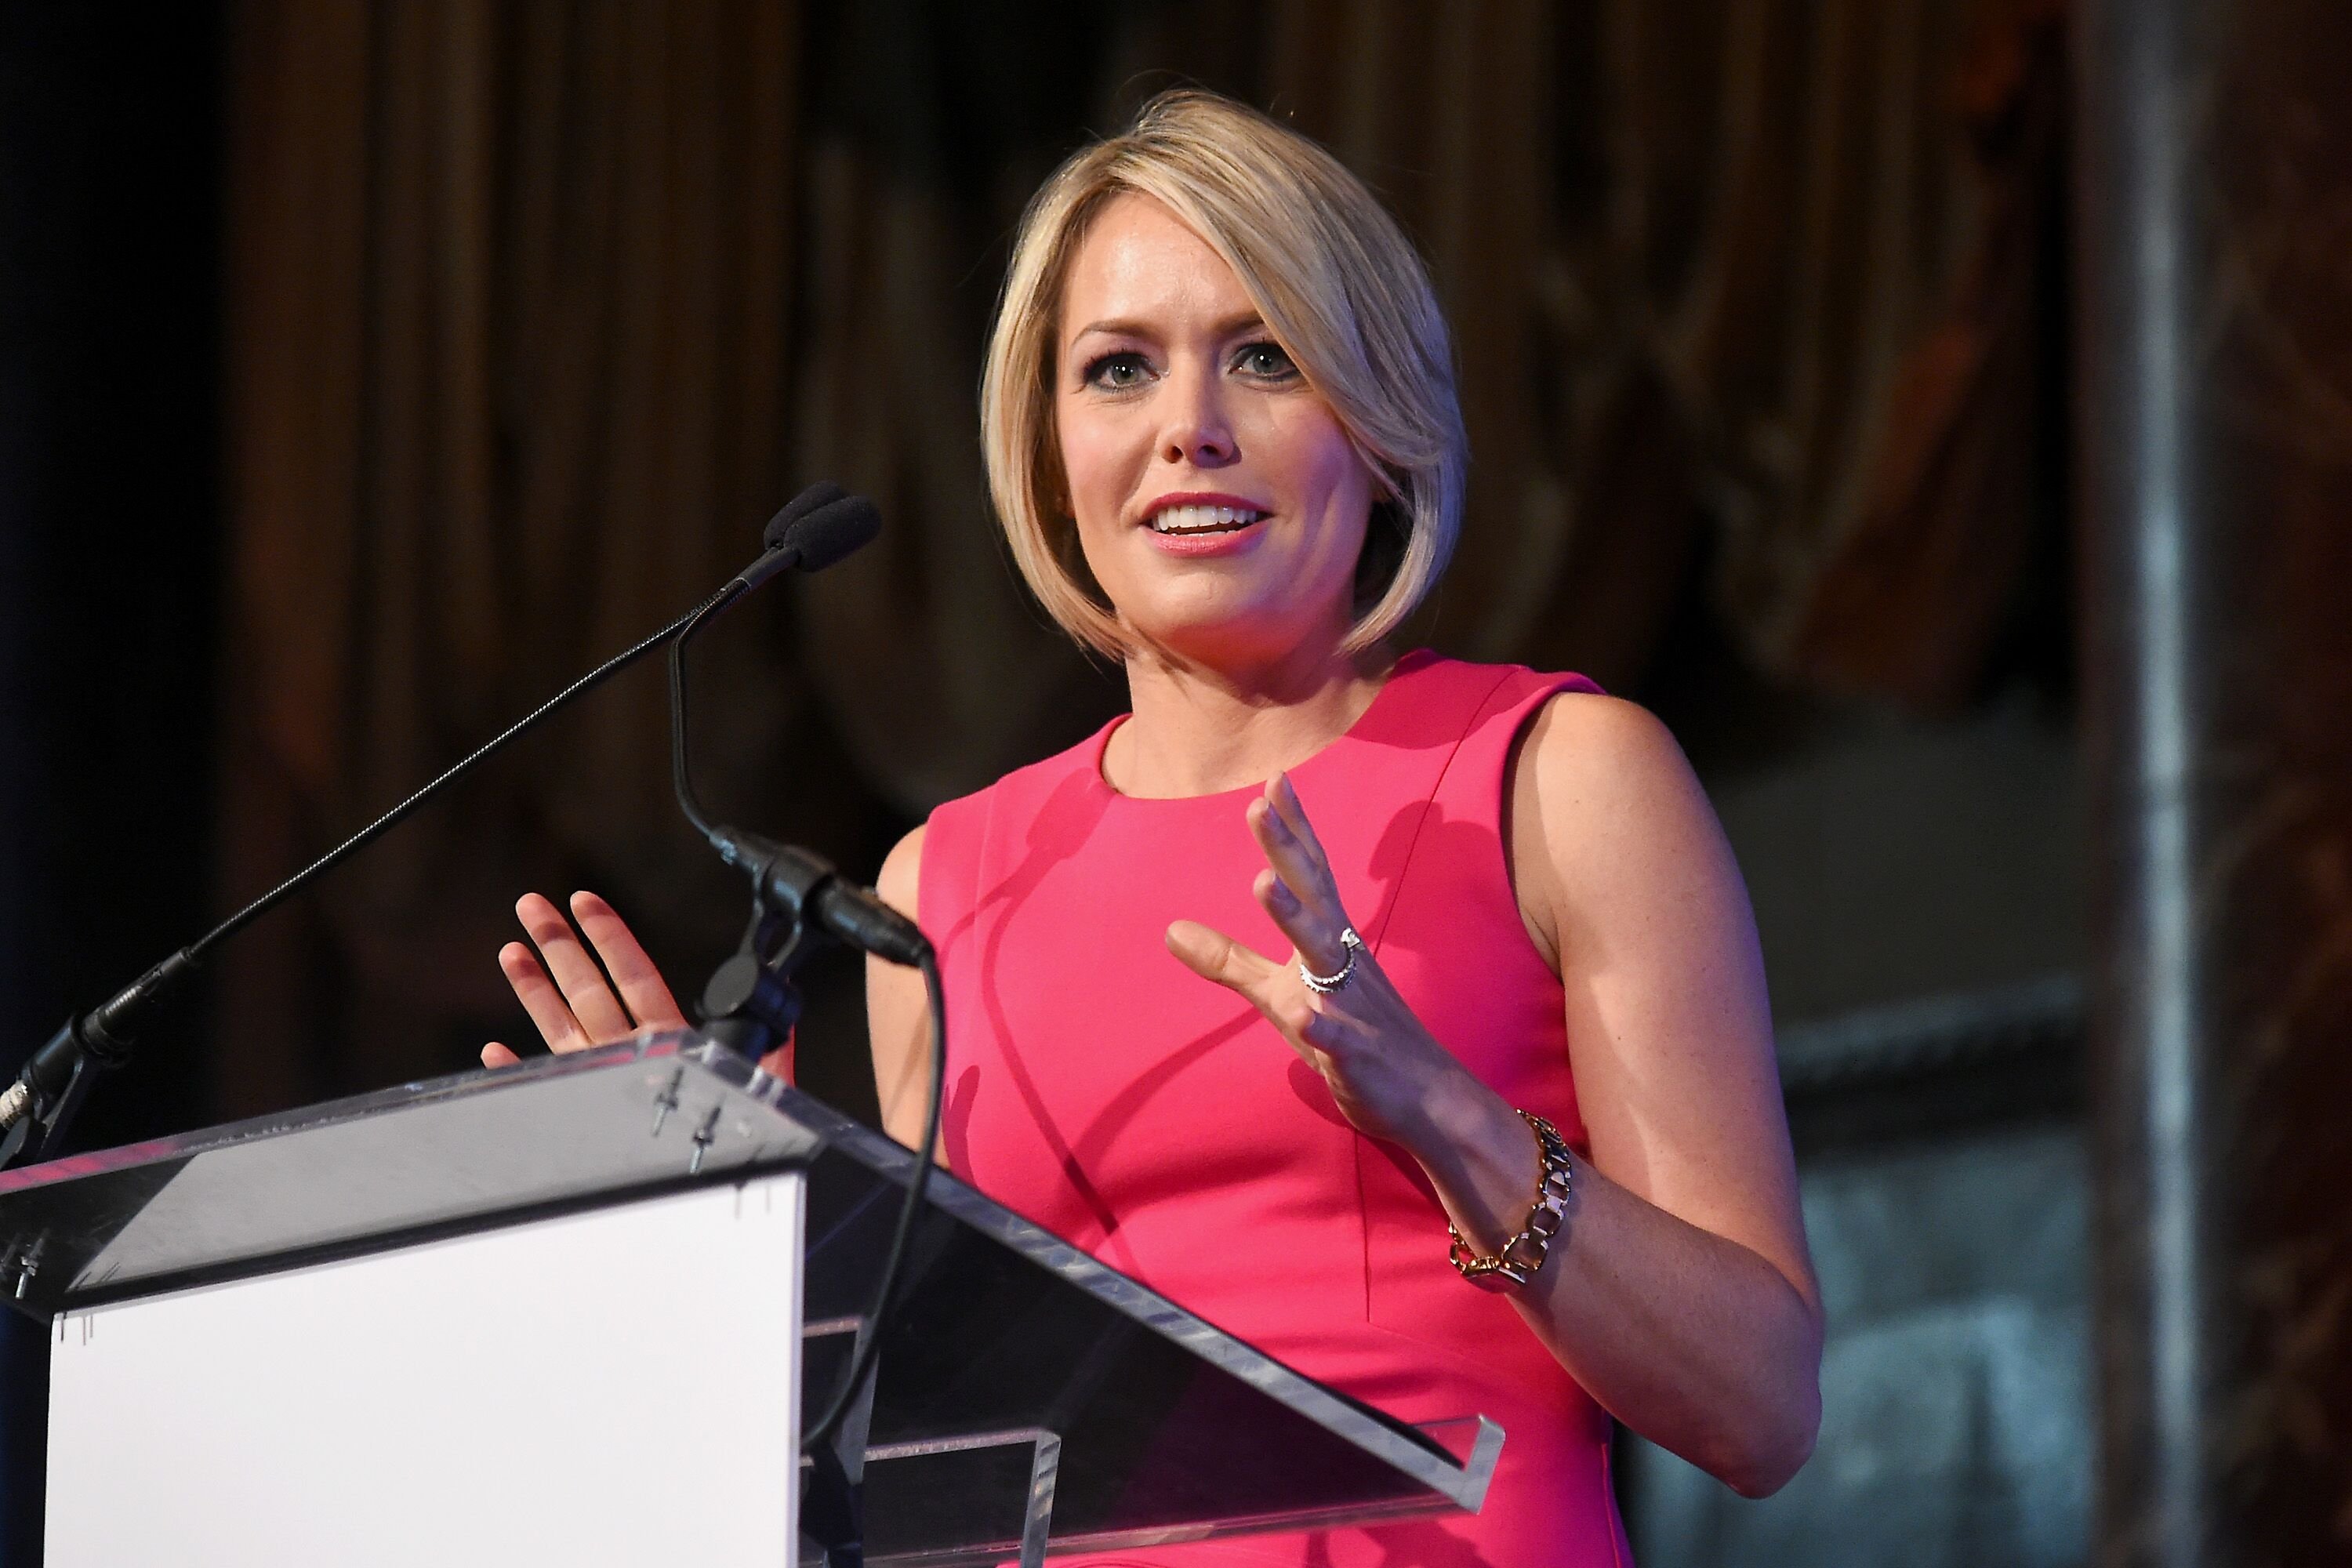 Dylan Dreyer attends the 42nd Annual Gracie Awards. | Source: Getty Images